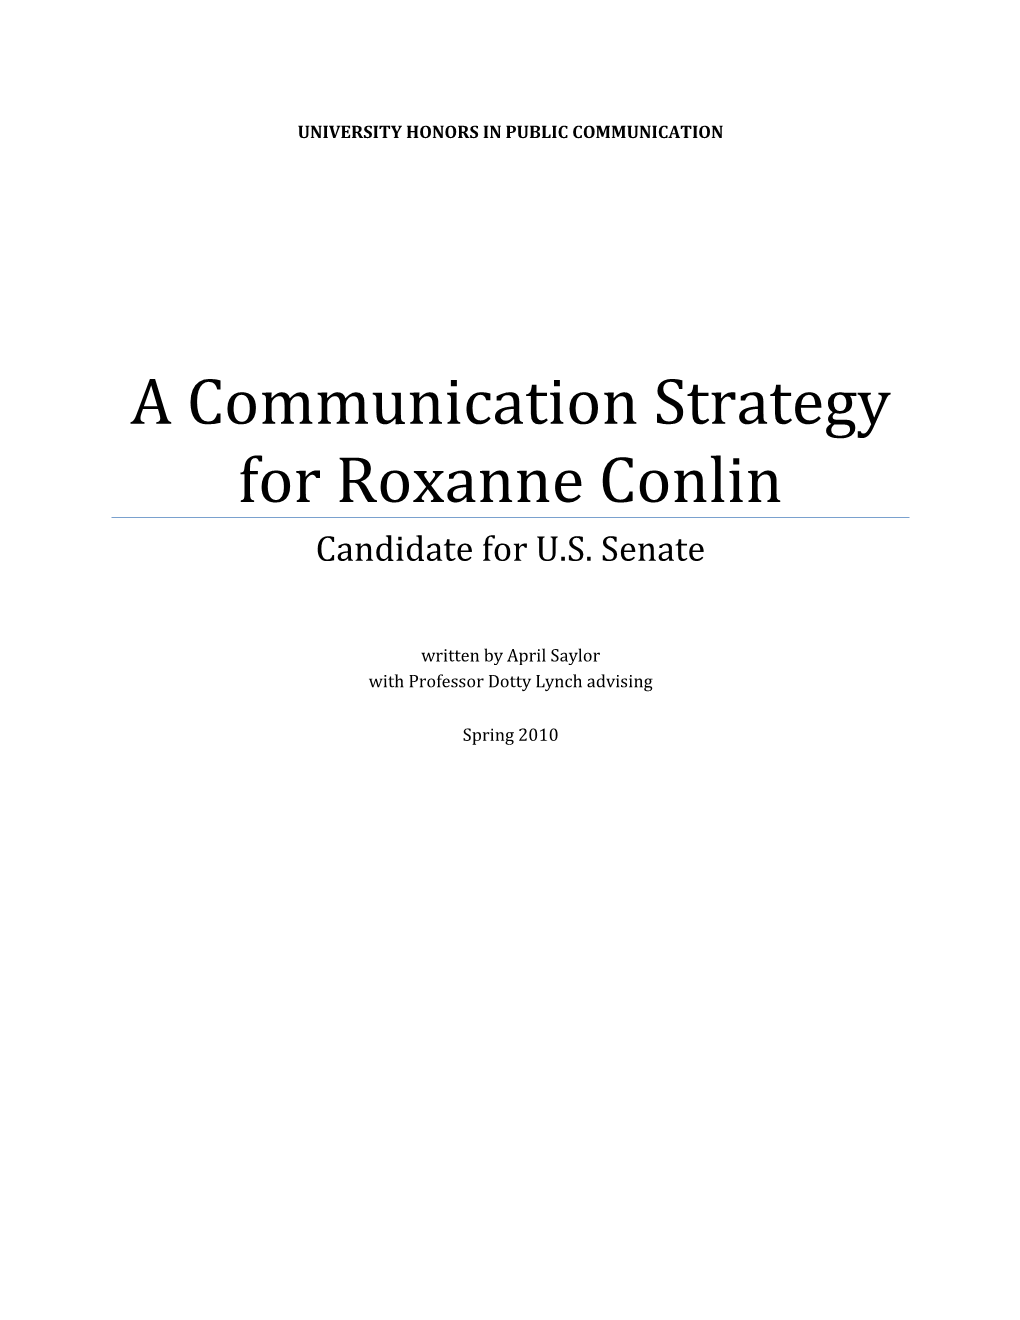 A Communication Strategy for Roxanne Conlin Candidate for U.S